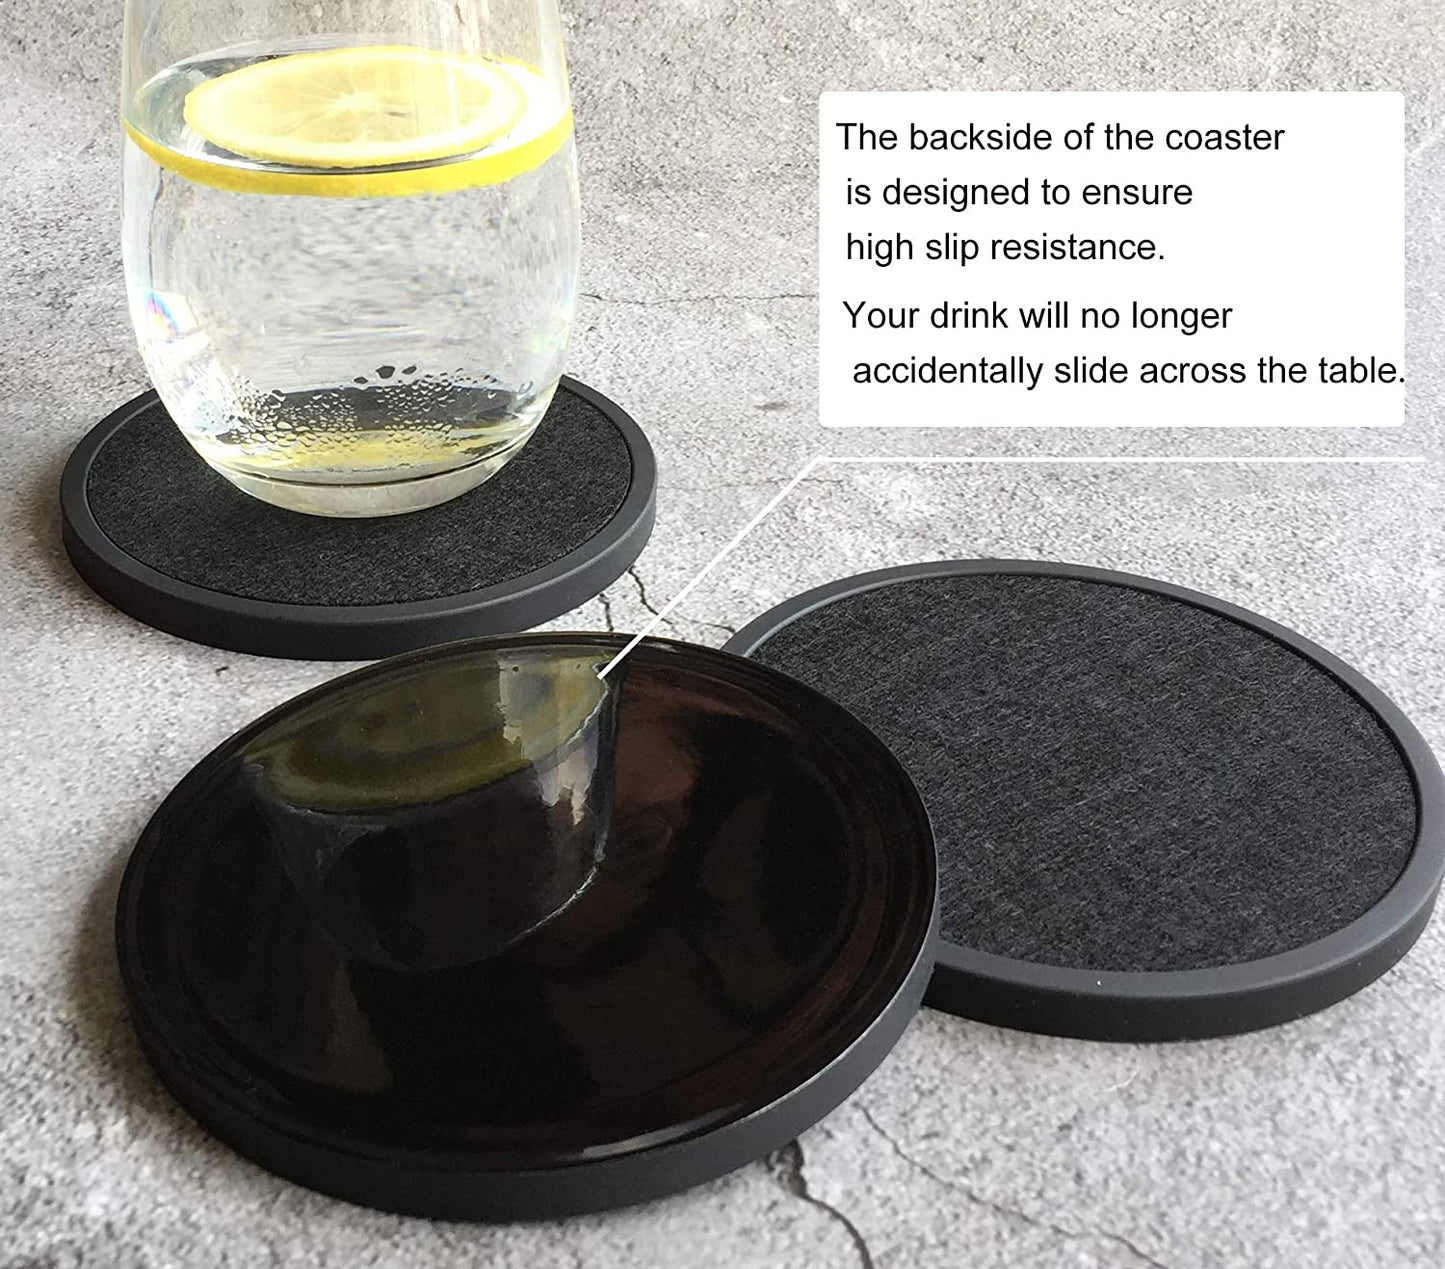 A pair of absorbent coasters. One has a cold glass of water on it. There is text which says, "The backside of the coaster is designed to ensure high slip resistance. Your drink will no longer accidentally slide across the table.